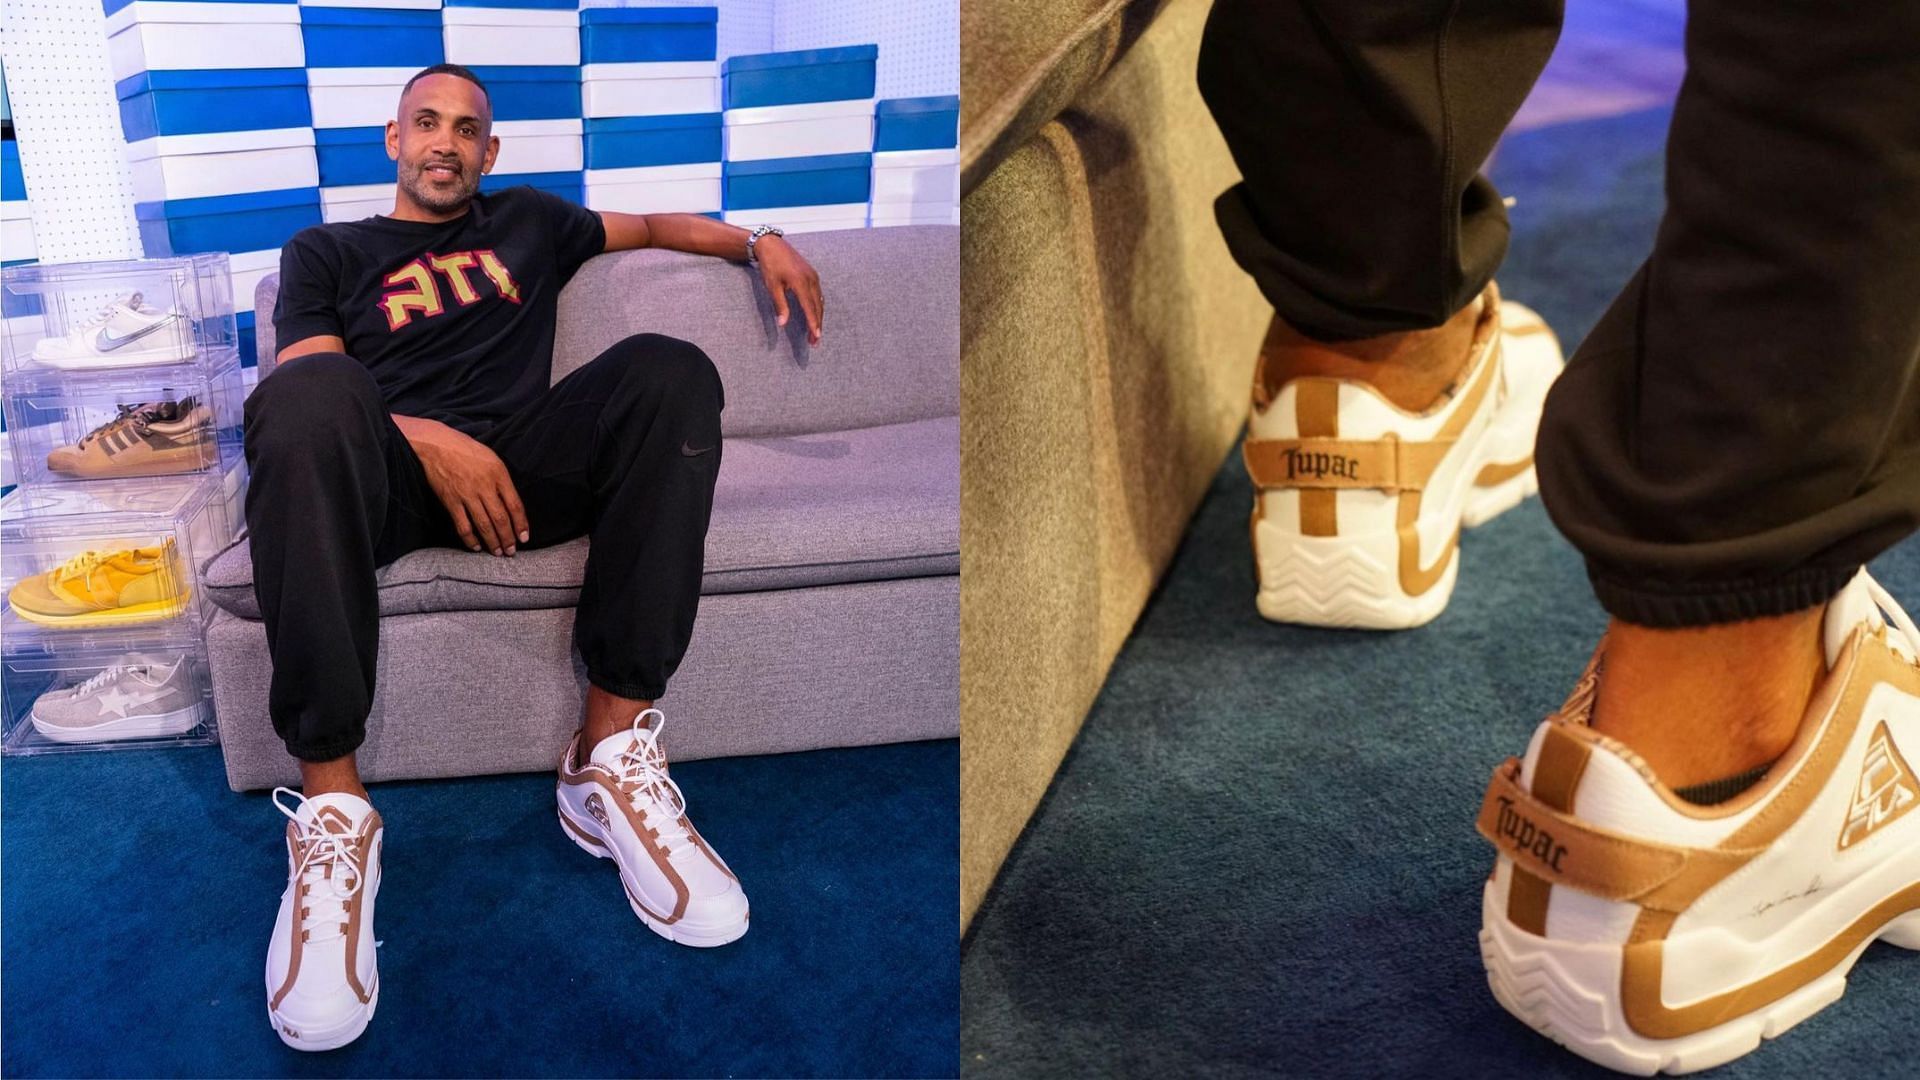 Upcoming Tupac 2Pac x FILA GH 2 sneakers (Image via @granthill / Instagram)